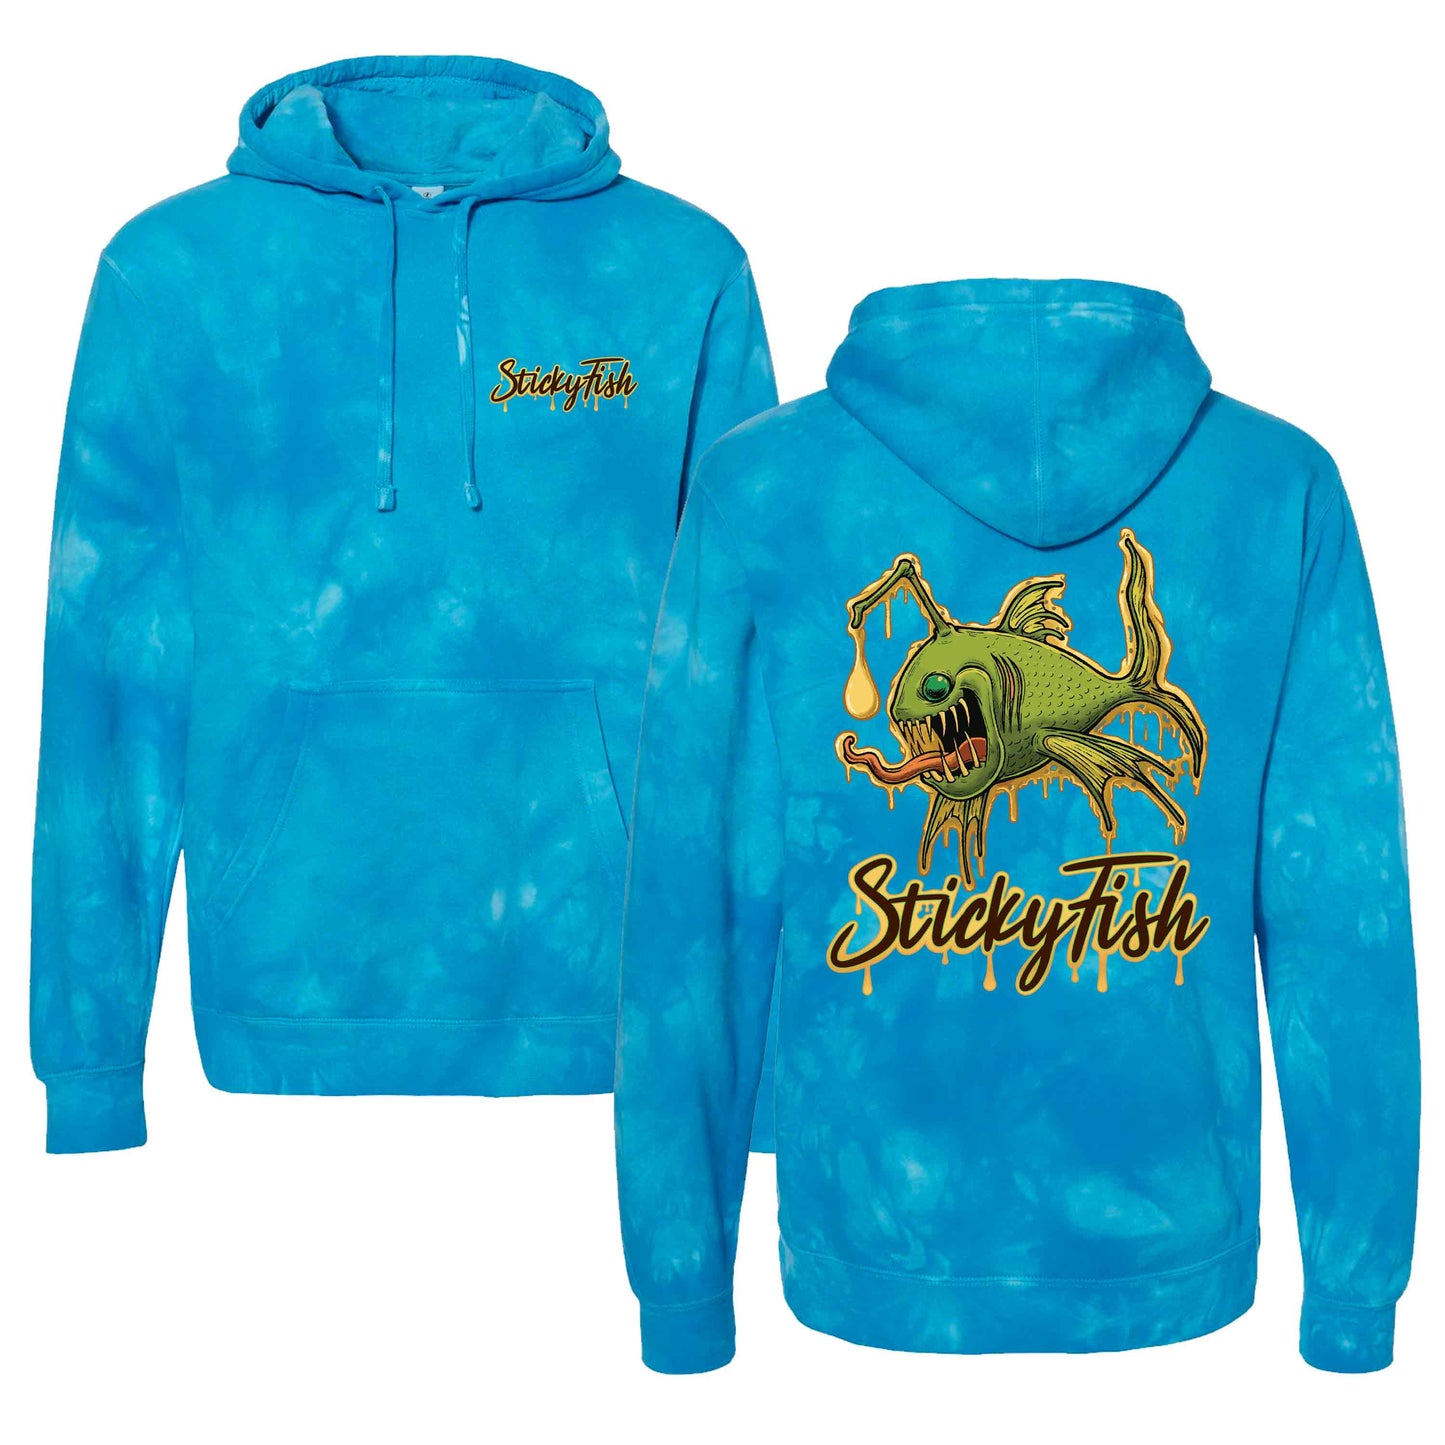 Sticky Fish - Pullover Hoodie - Blue Tie Dye